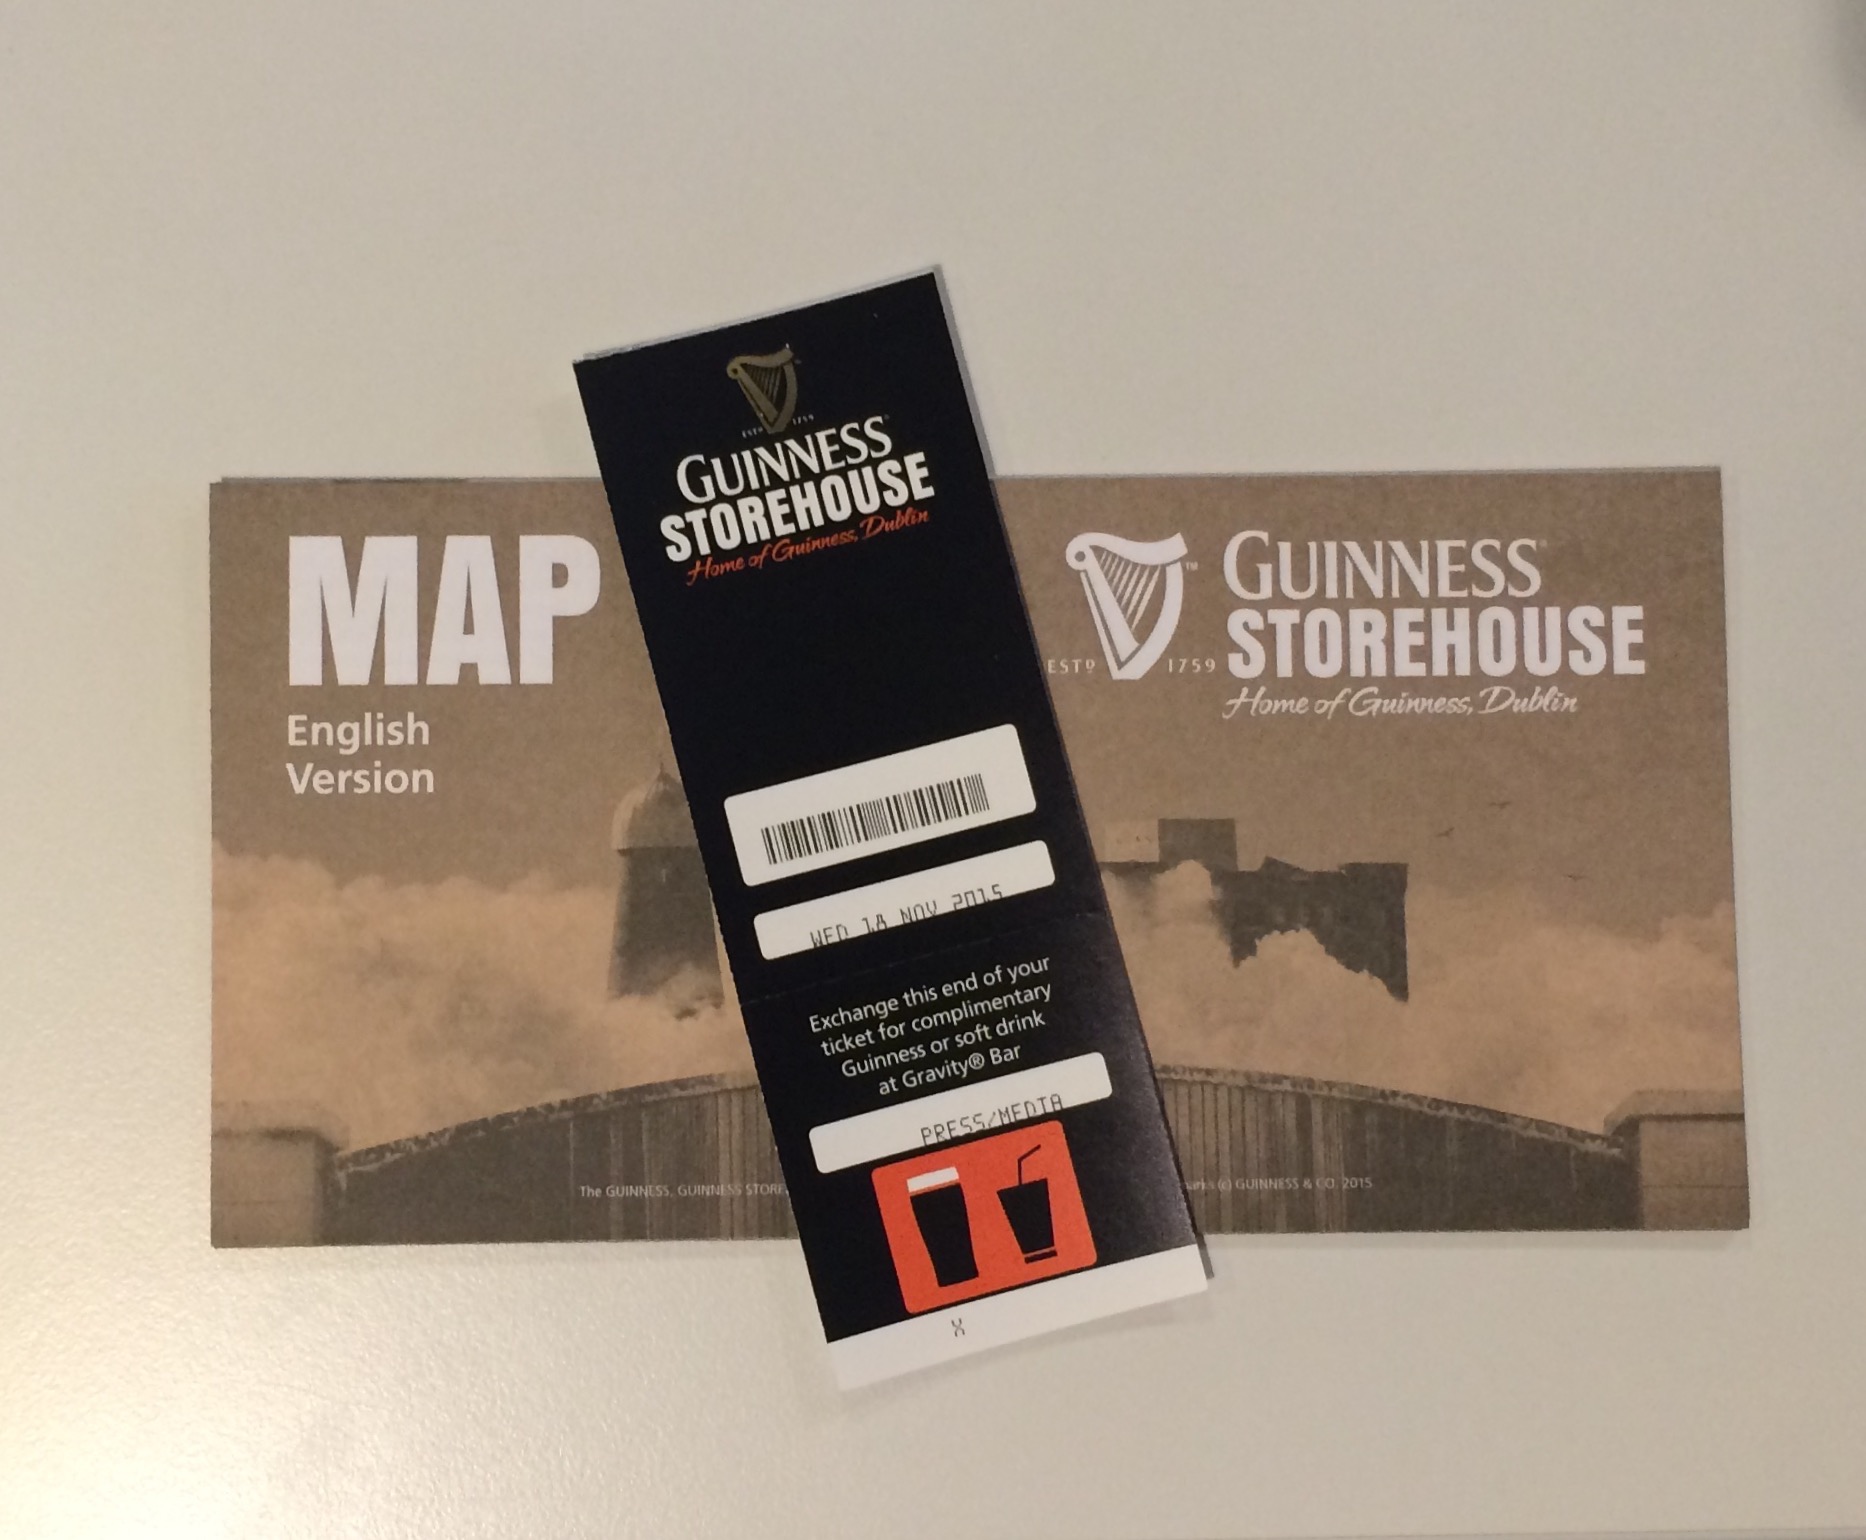 Ready to conquer the Guinness Storehouse.